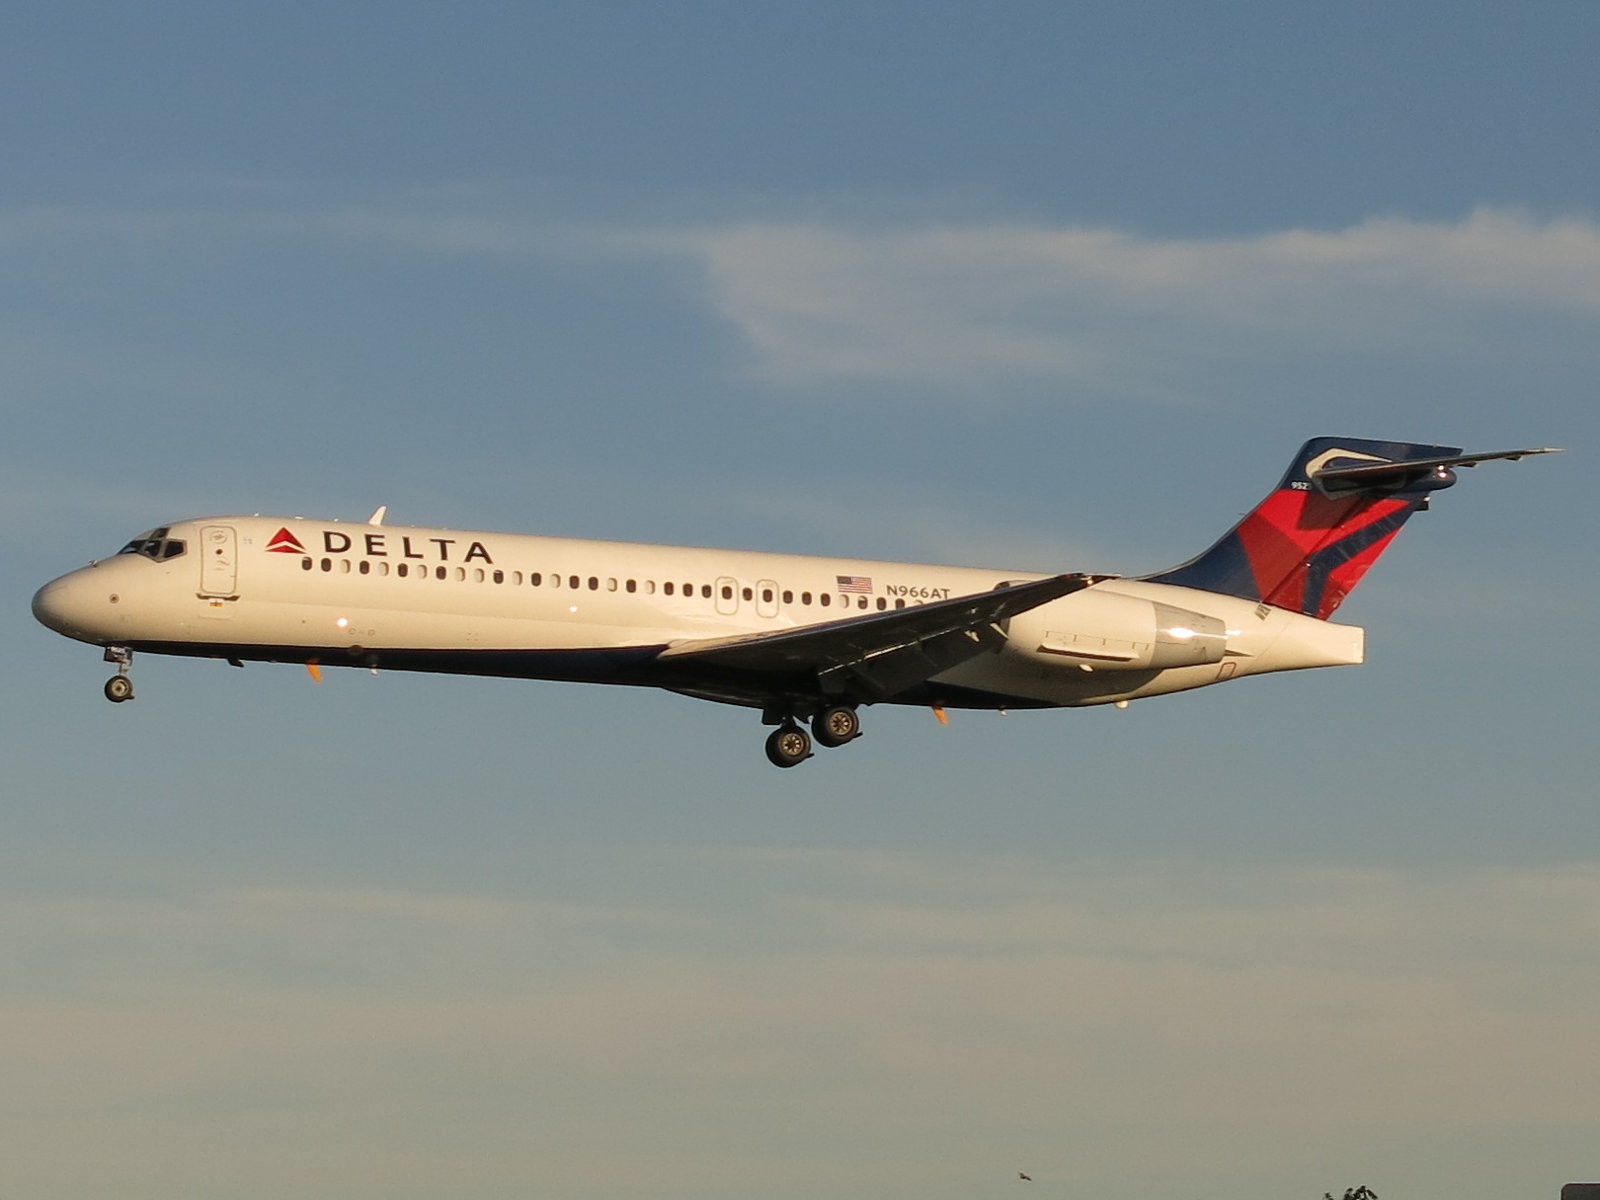 A Delta Air Lines Boeing 717 arrives into New York LaGuardia airport. Wikipedia Photo by: AEMoreira042281